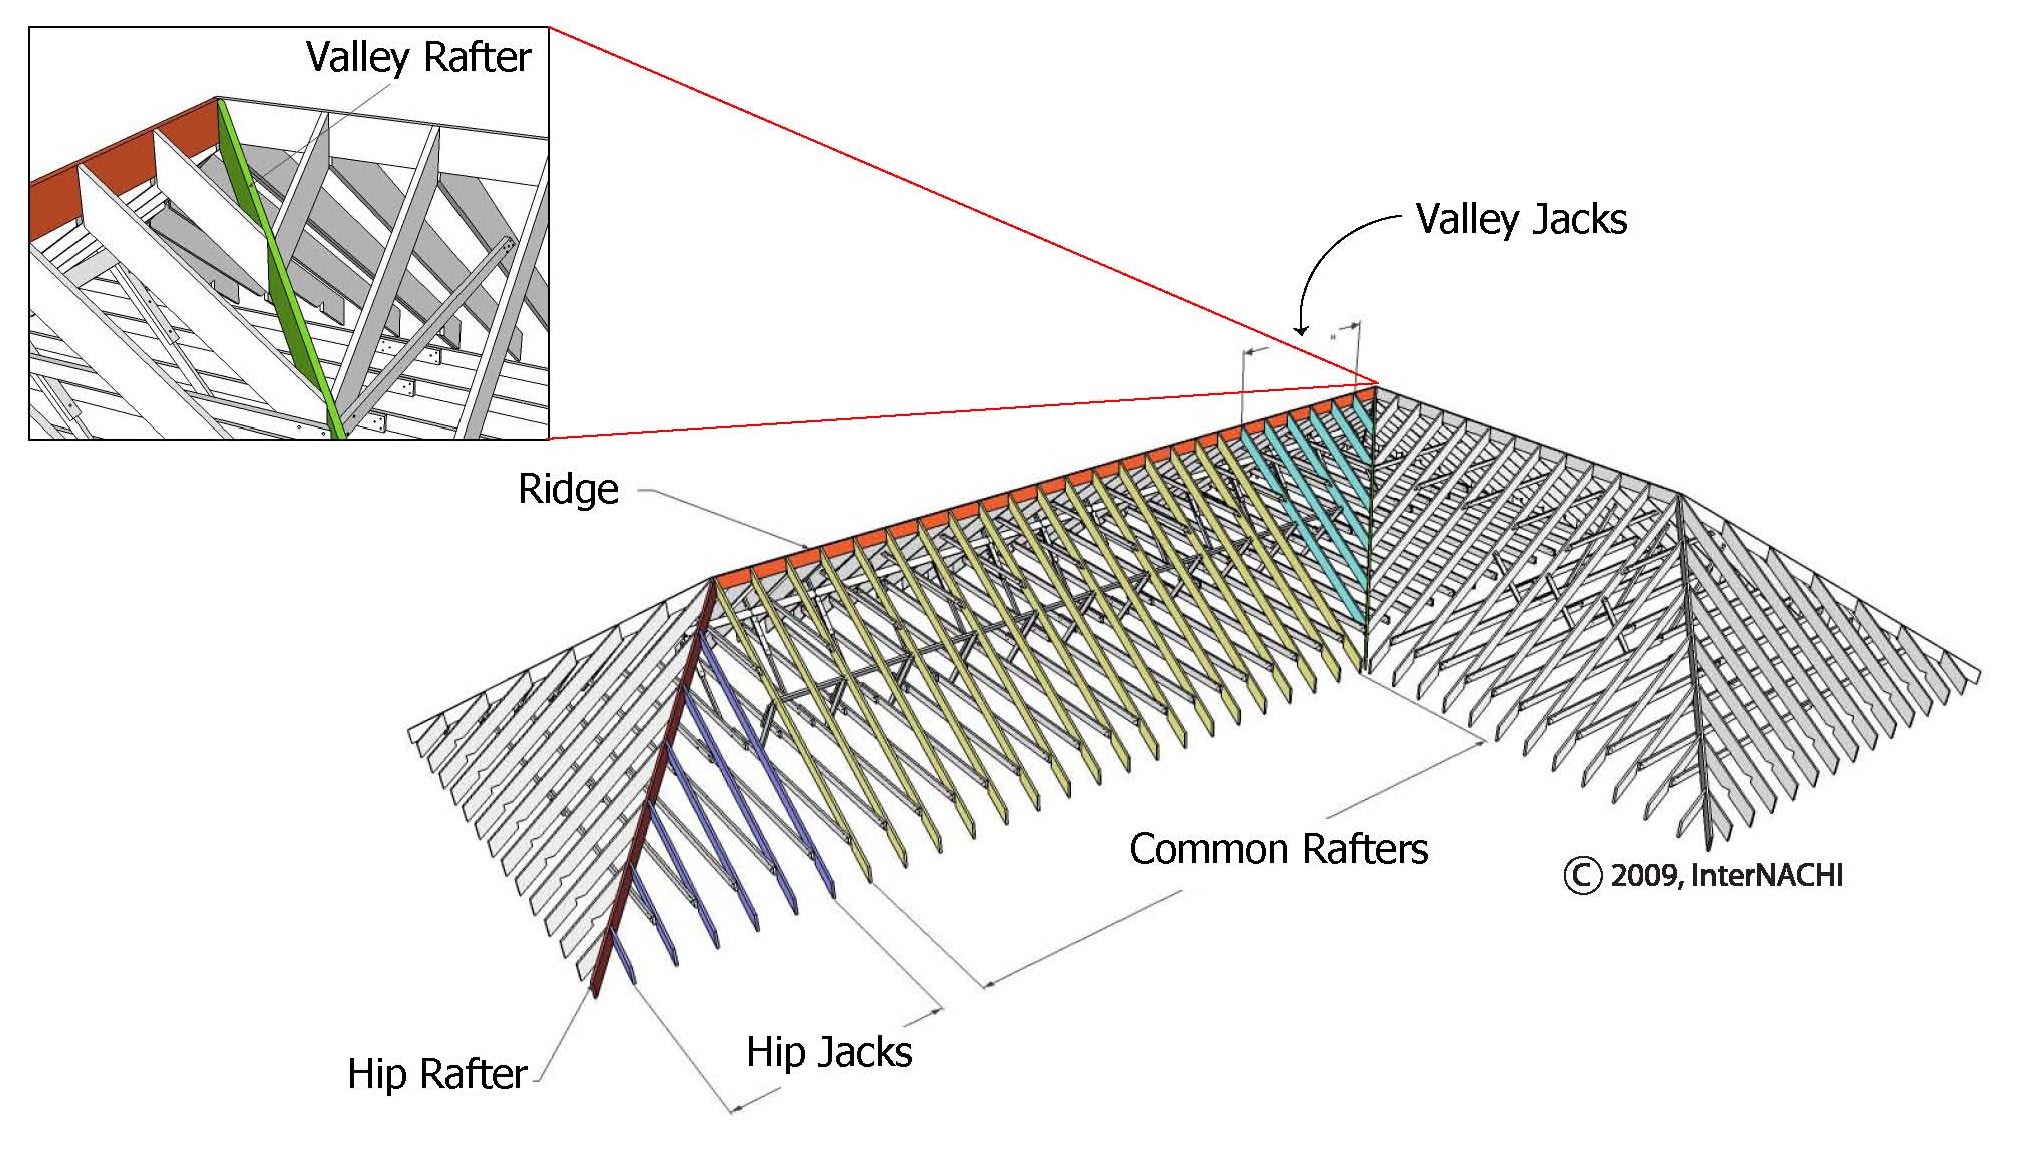 Valley rafter.